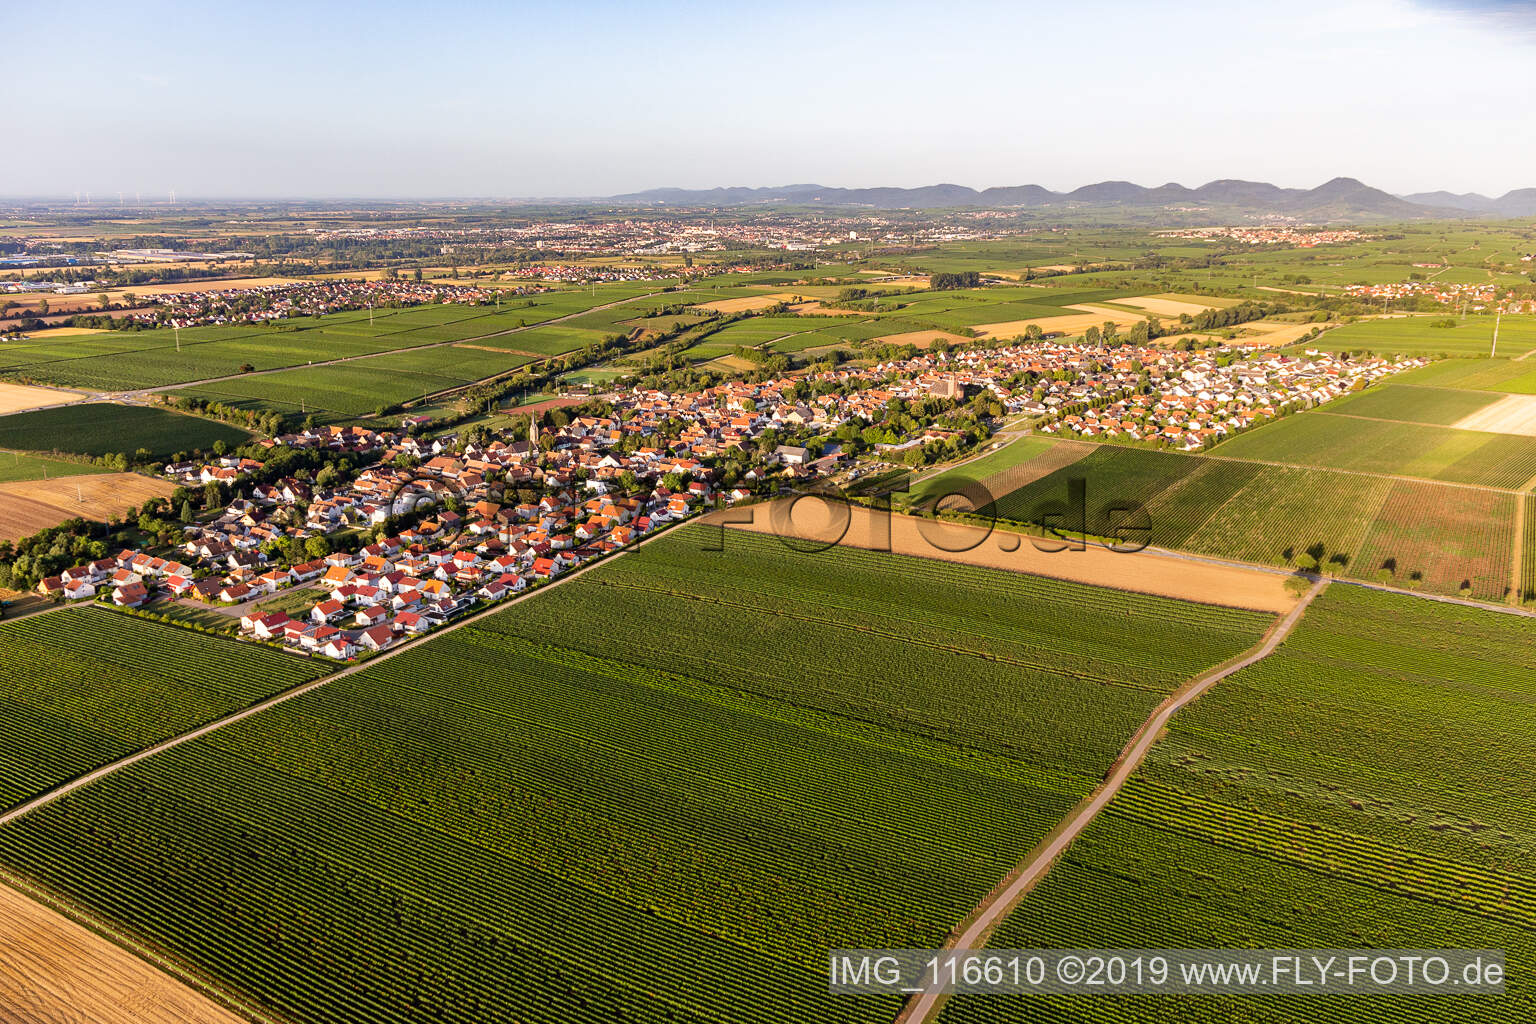 Agricultural land and field borders surround the settlement area of the village in Essingen in the state Rhineland-Palatinate, Germany seen from a drone